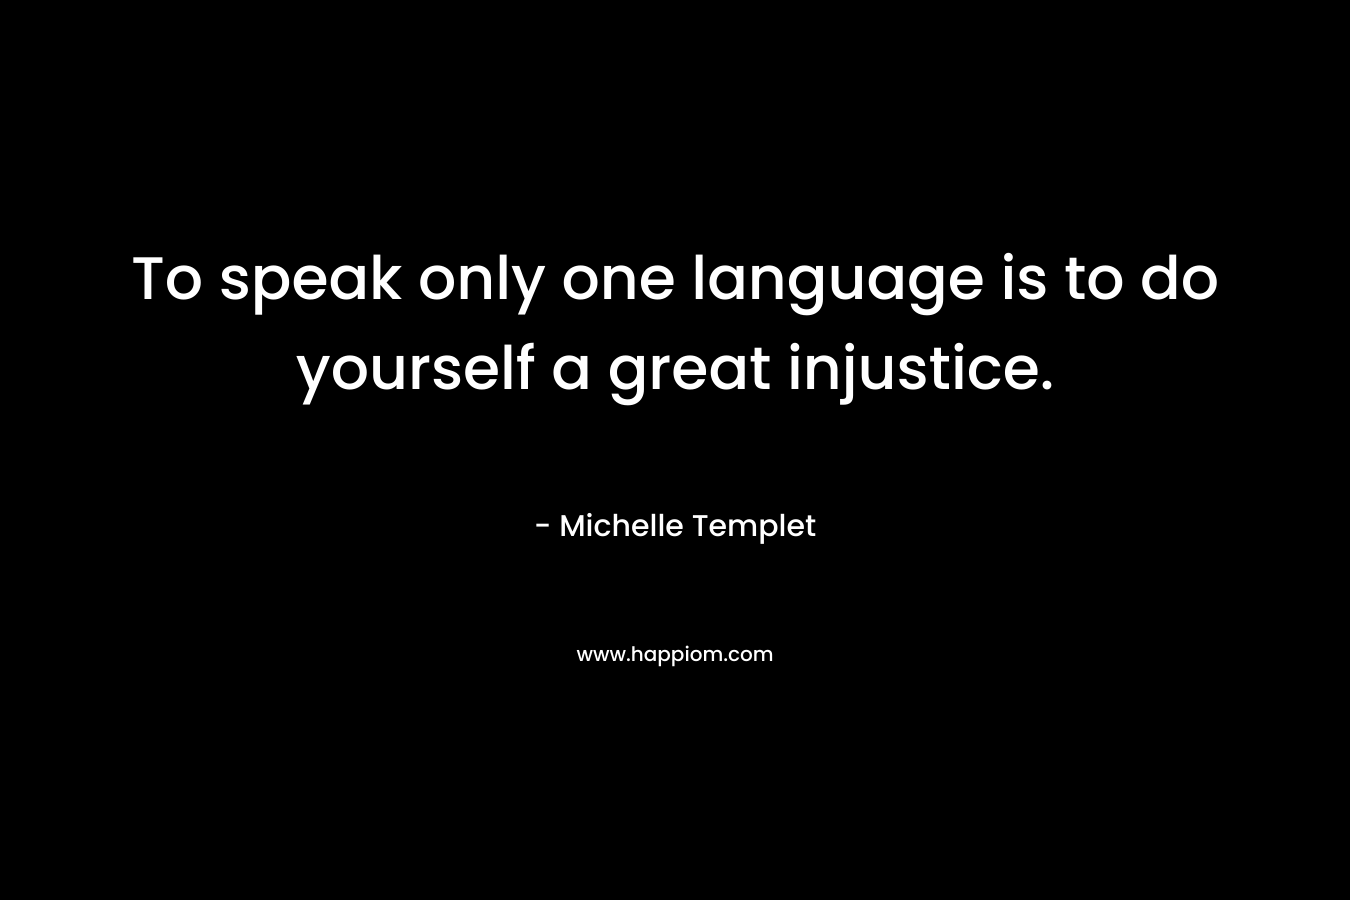 To speak only one language is to do yourself a great injustice.